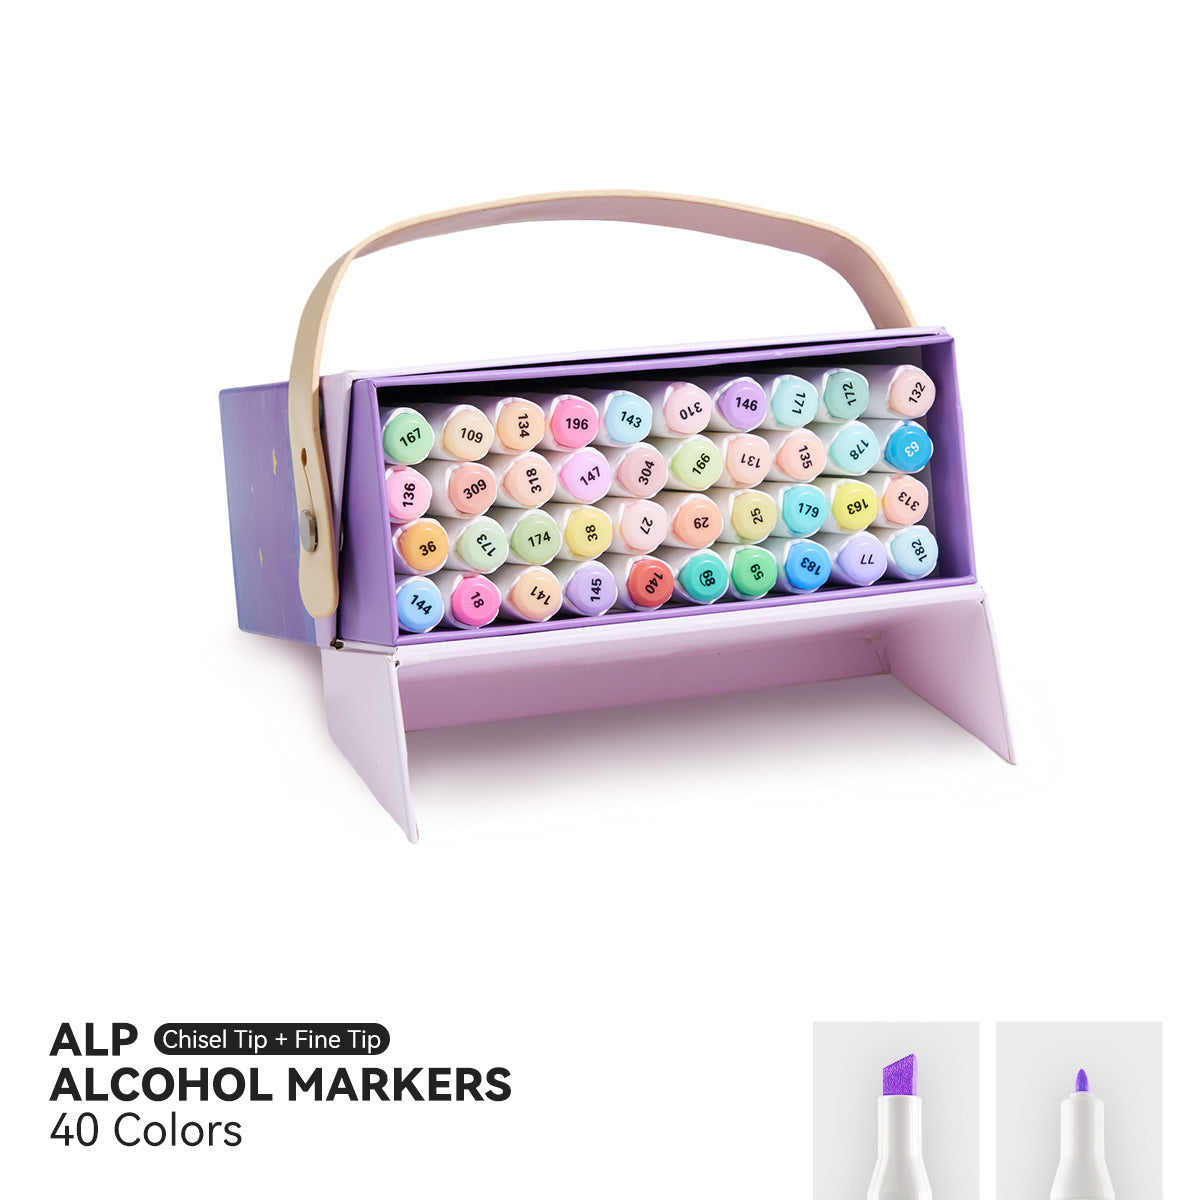 NEW RELEASE, ARRTX PASTEL ALCOHOL MARKERS